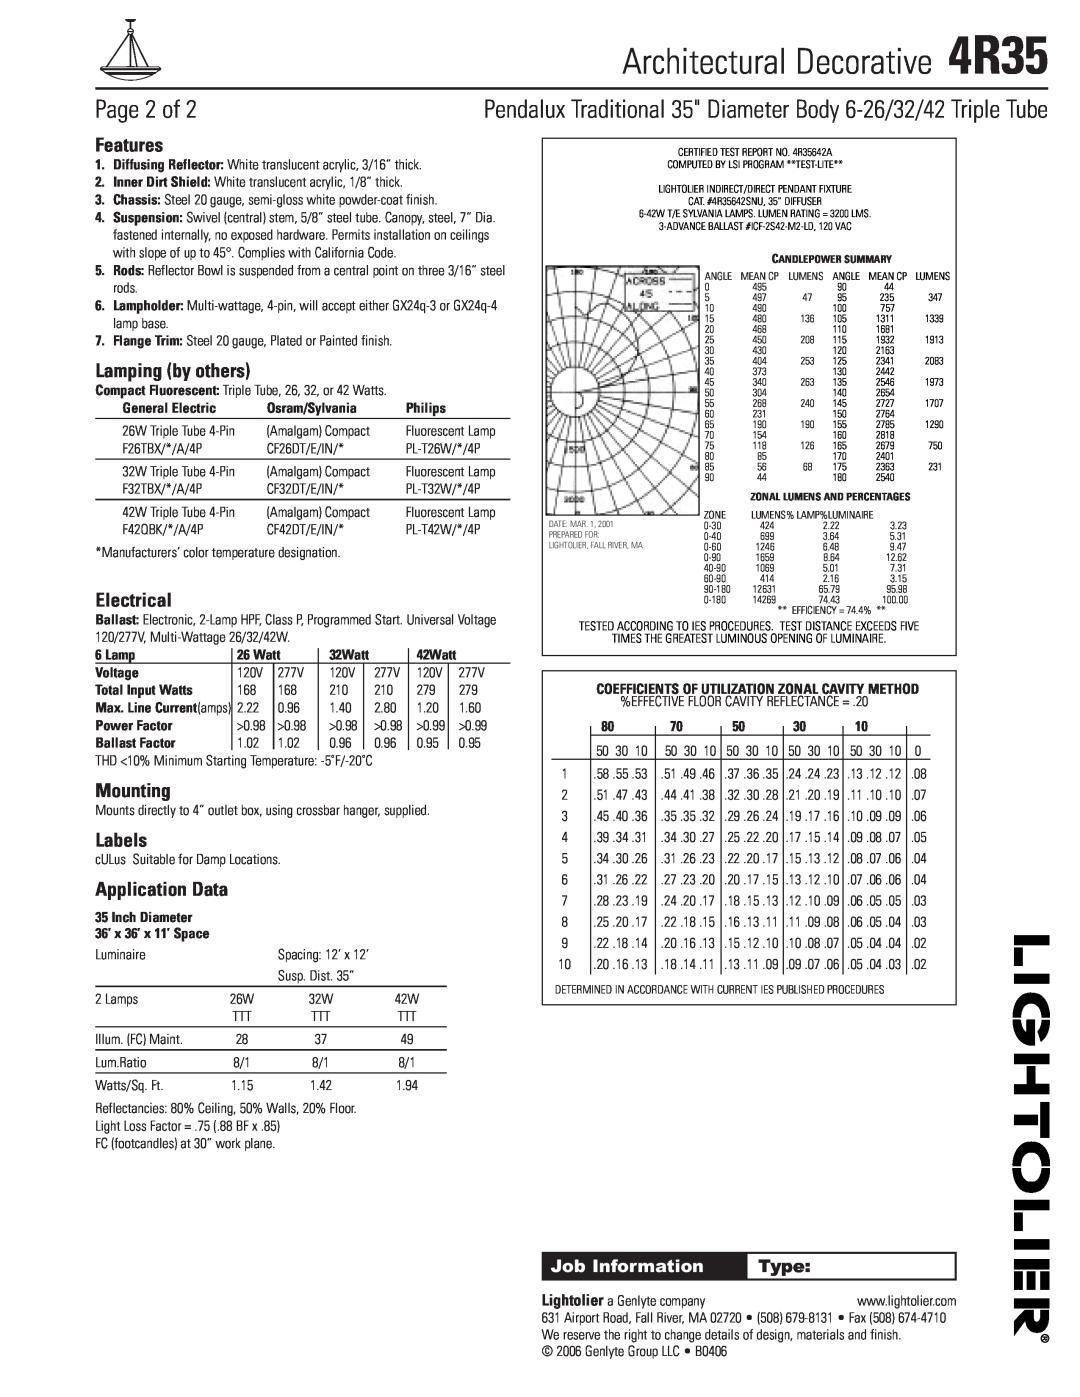 Lightolier 4R35 specifications Page 2 of, Features, Lamping by others, Electrical, Mounting, Labels, Application Data, Type 